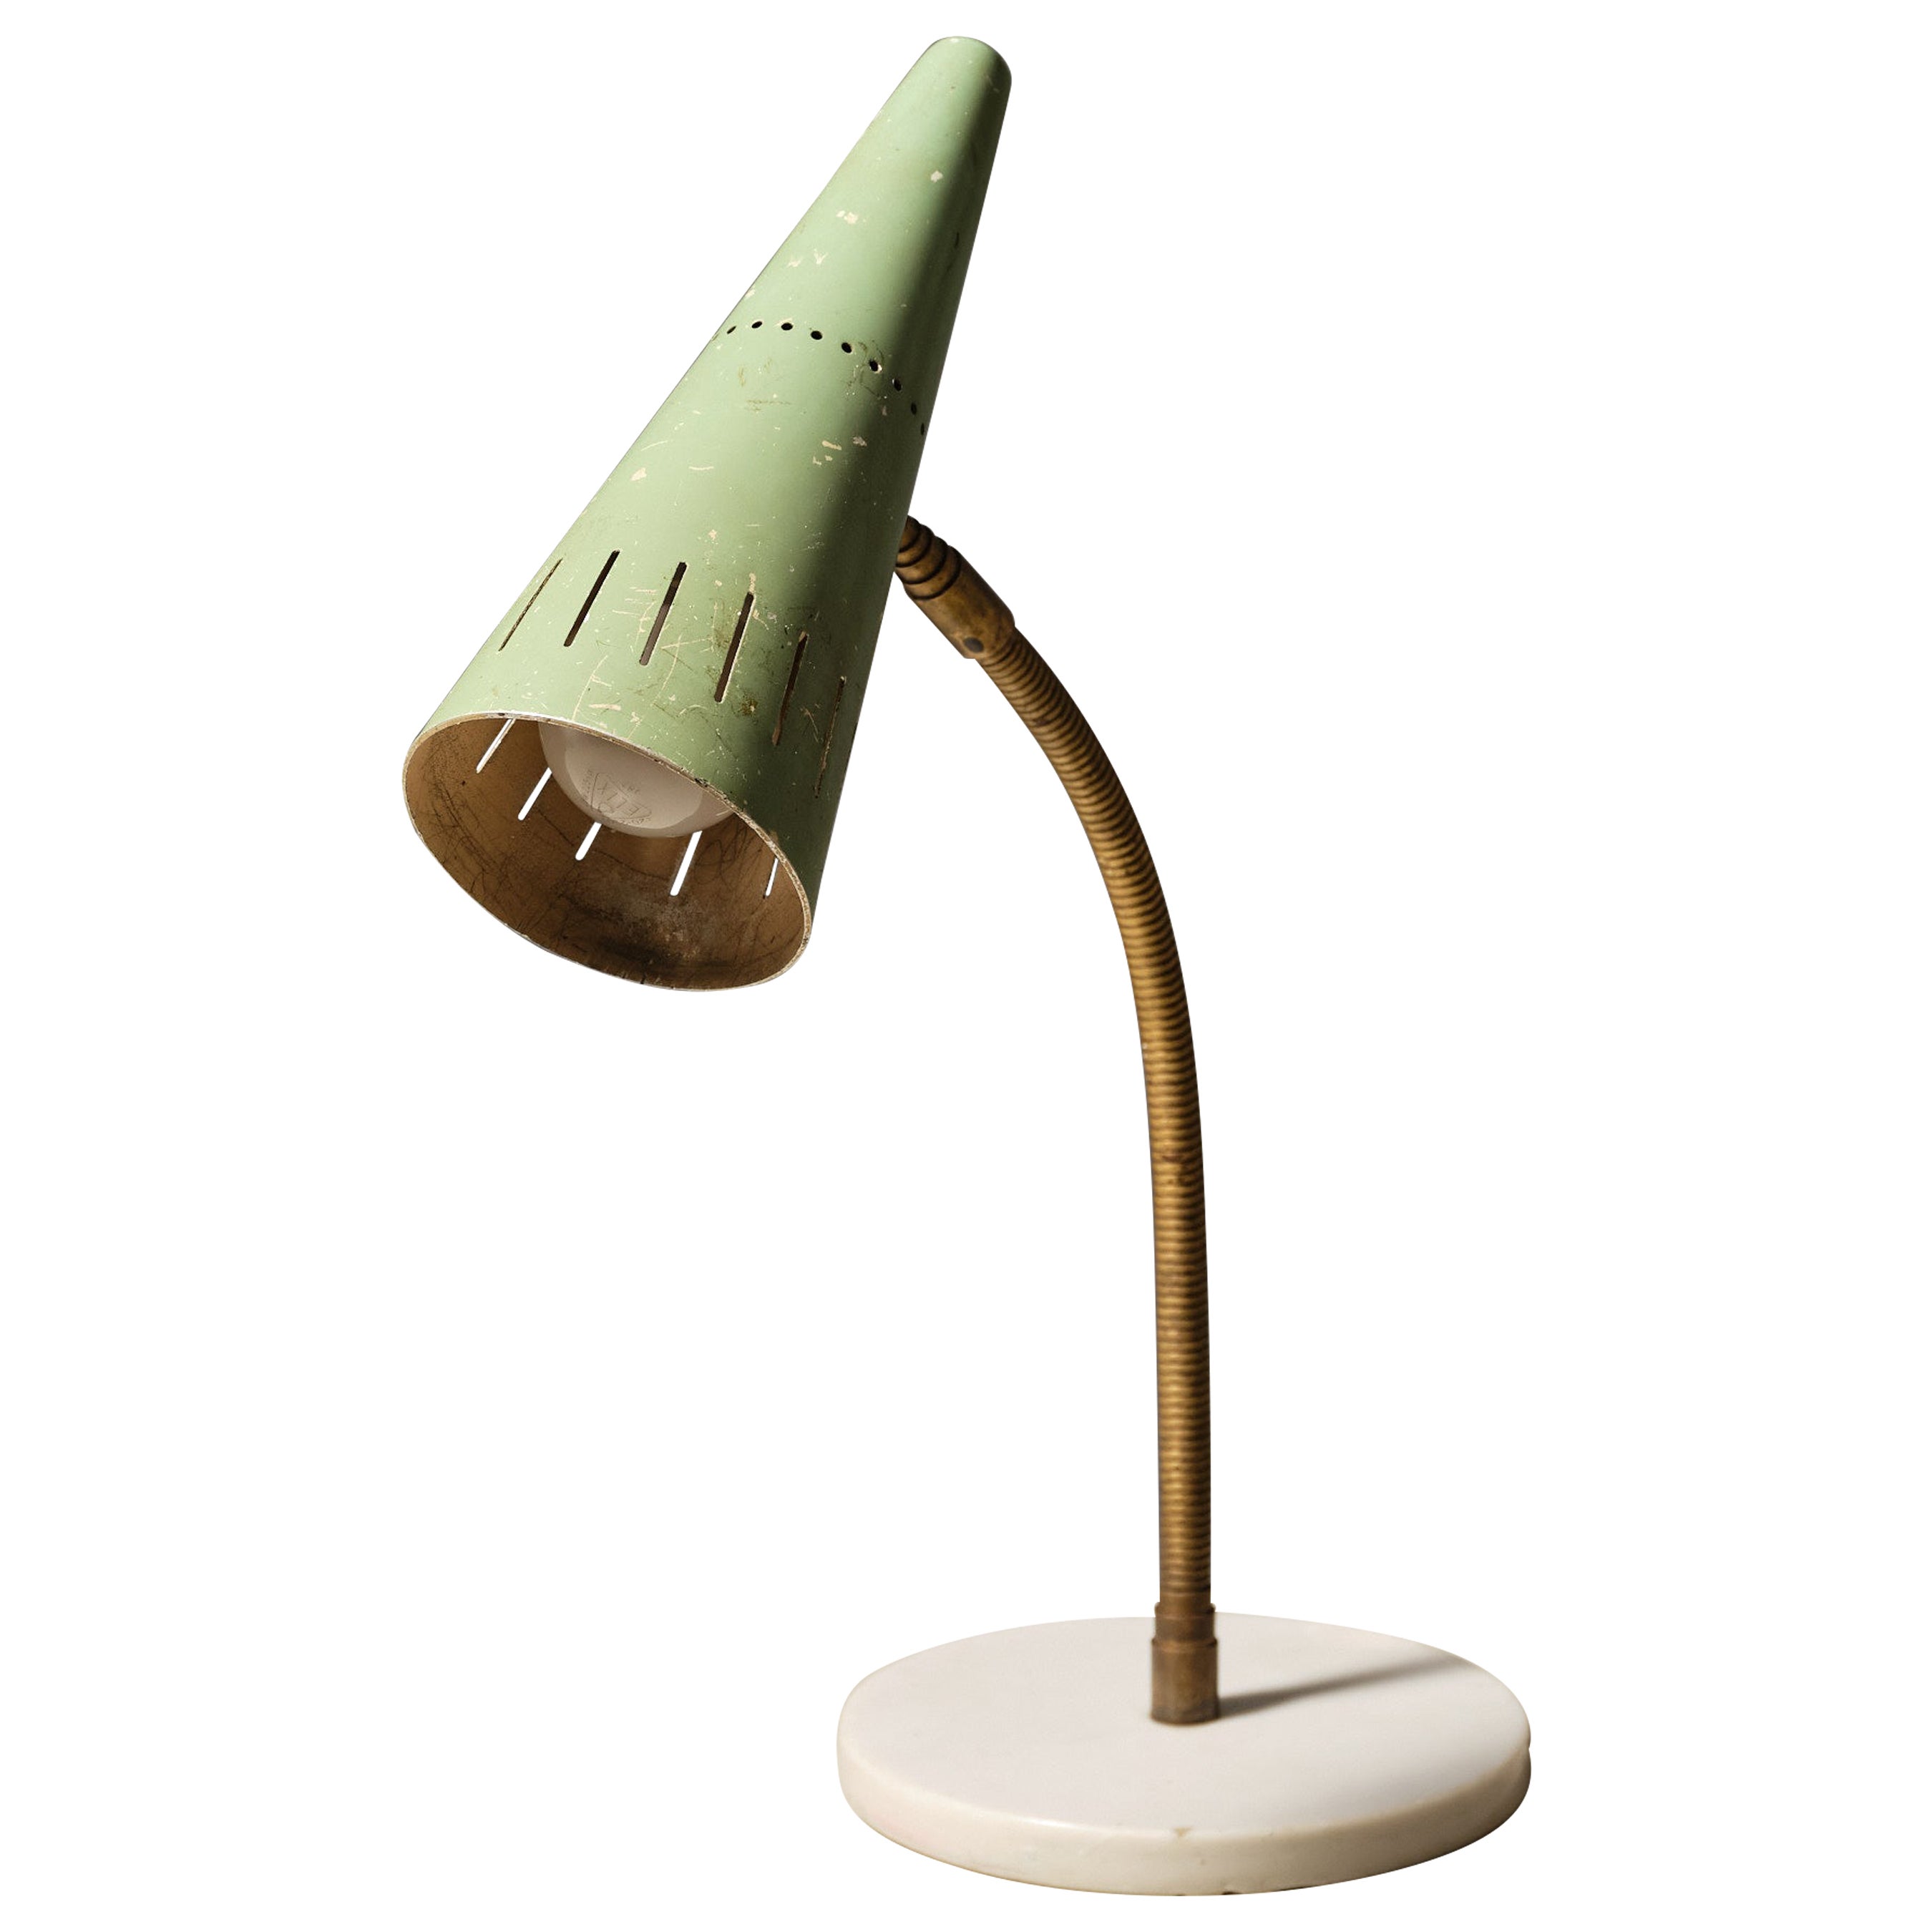 Vintage Italian Table Lamp - 1950s Design with Green Lacquered Metal Shade